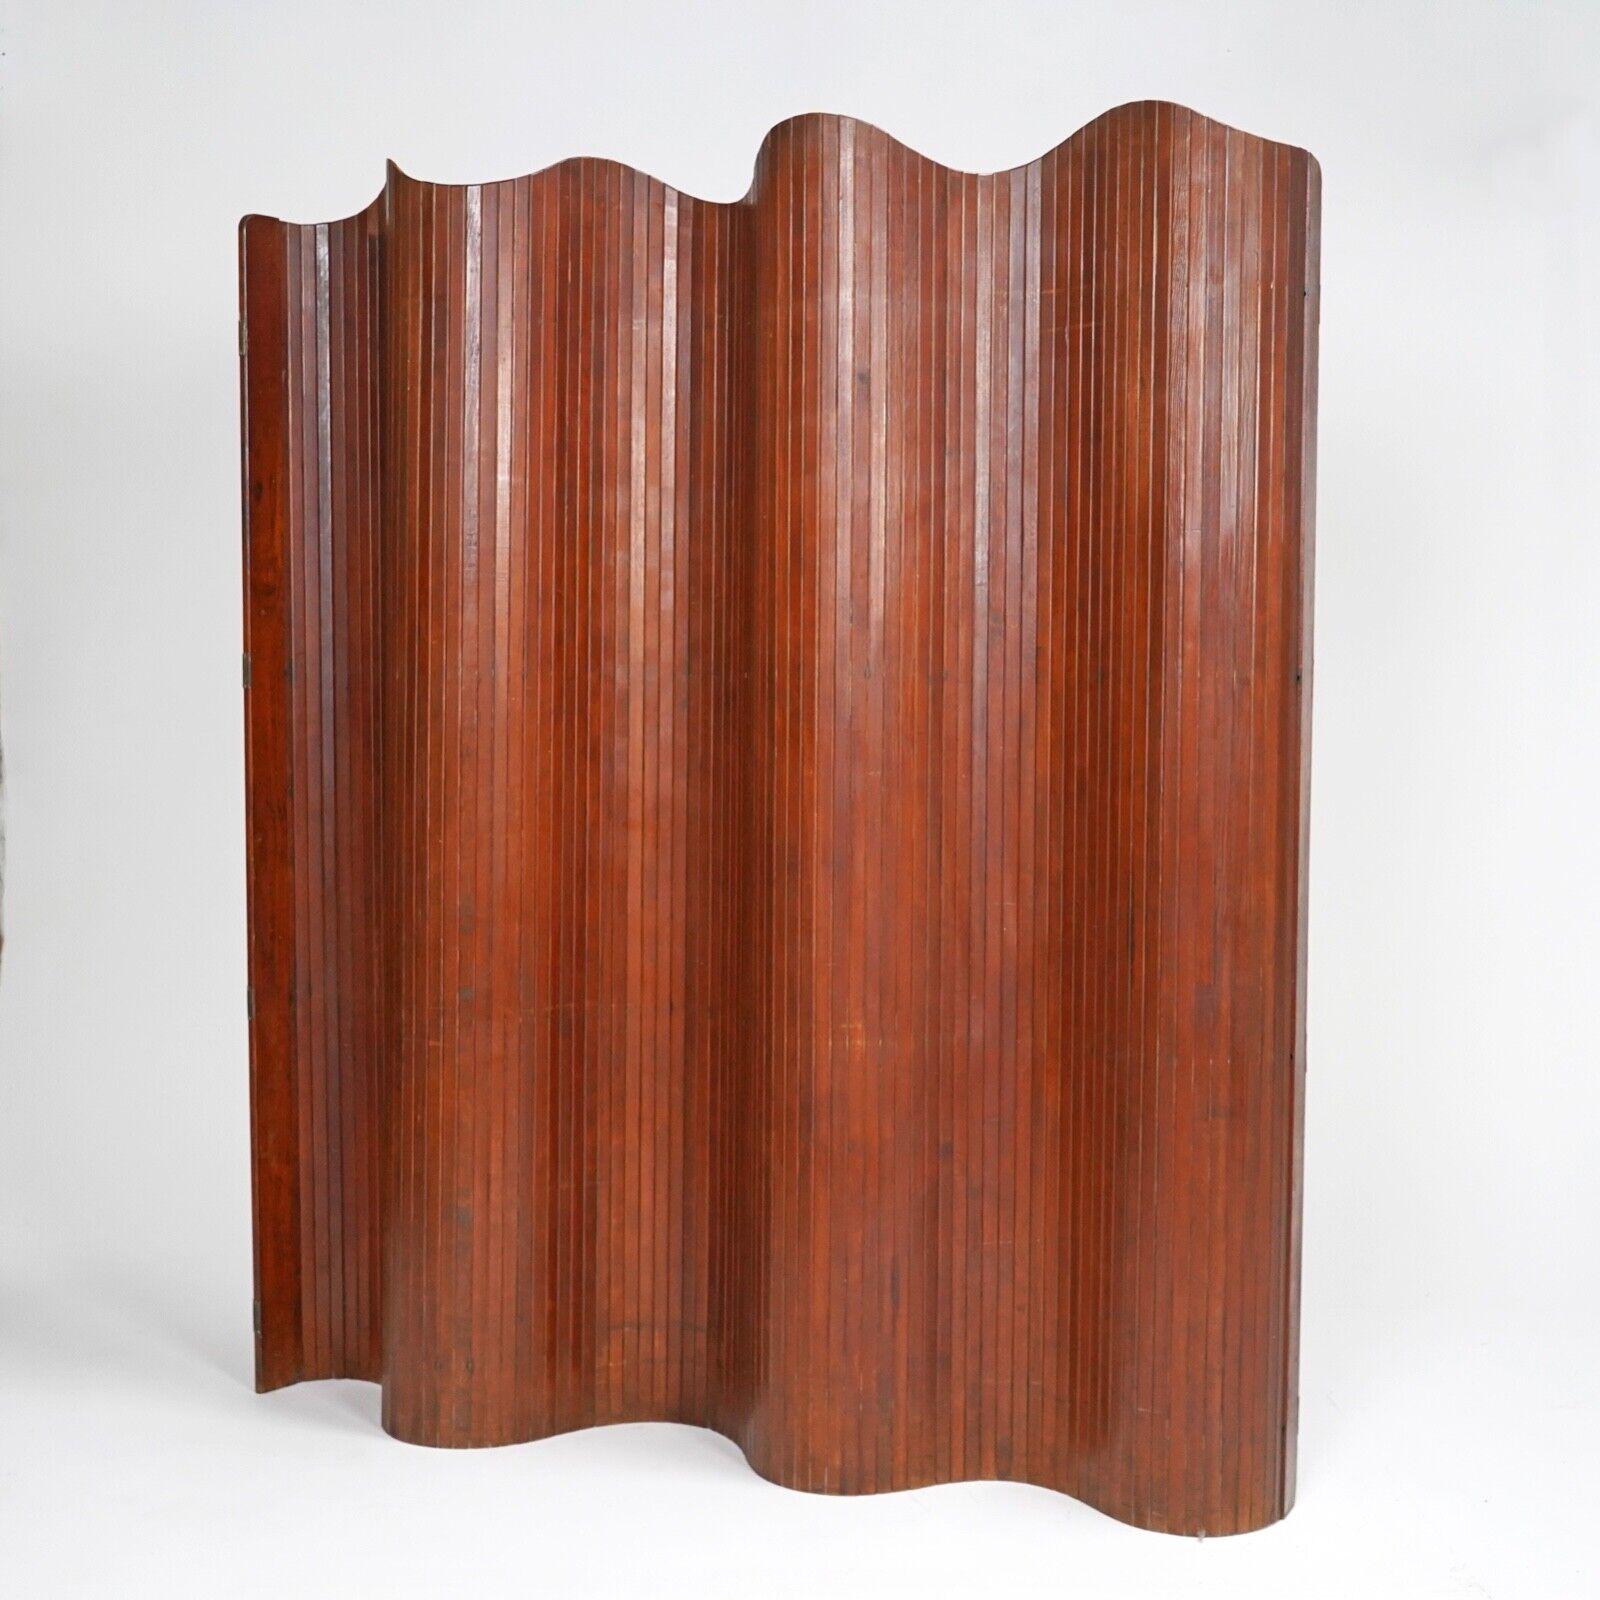 A original 1930s large Tambour screen attributed to Jomain Baumann. 
The screen has had its wire recently replaced so its working perfectly.
The original nameplate is missing but we believe it to be Baumann.
Made from pine.

Dimensions
Height